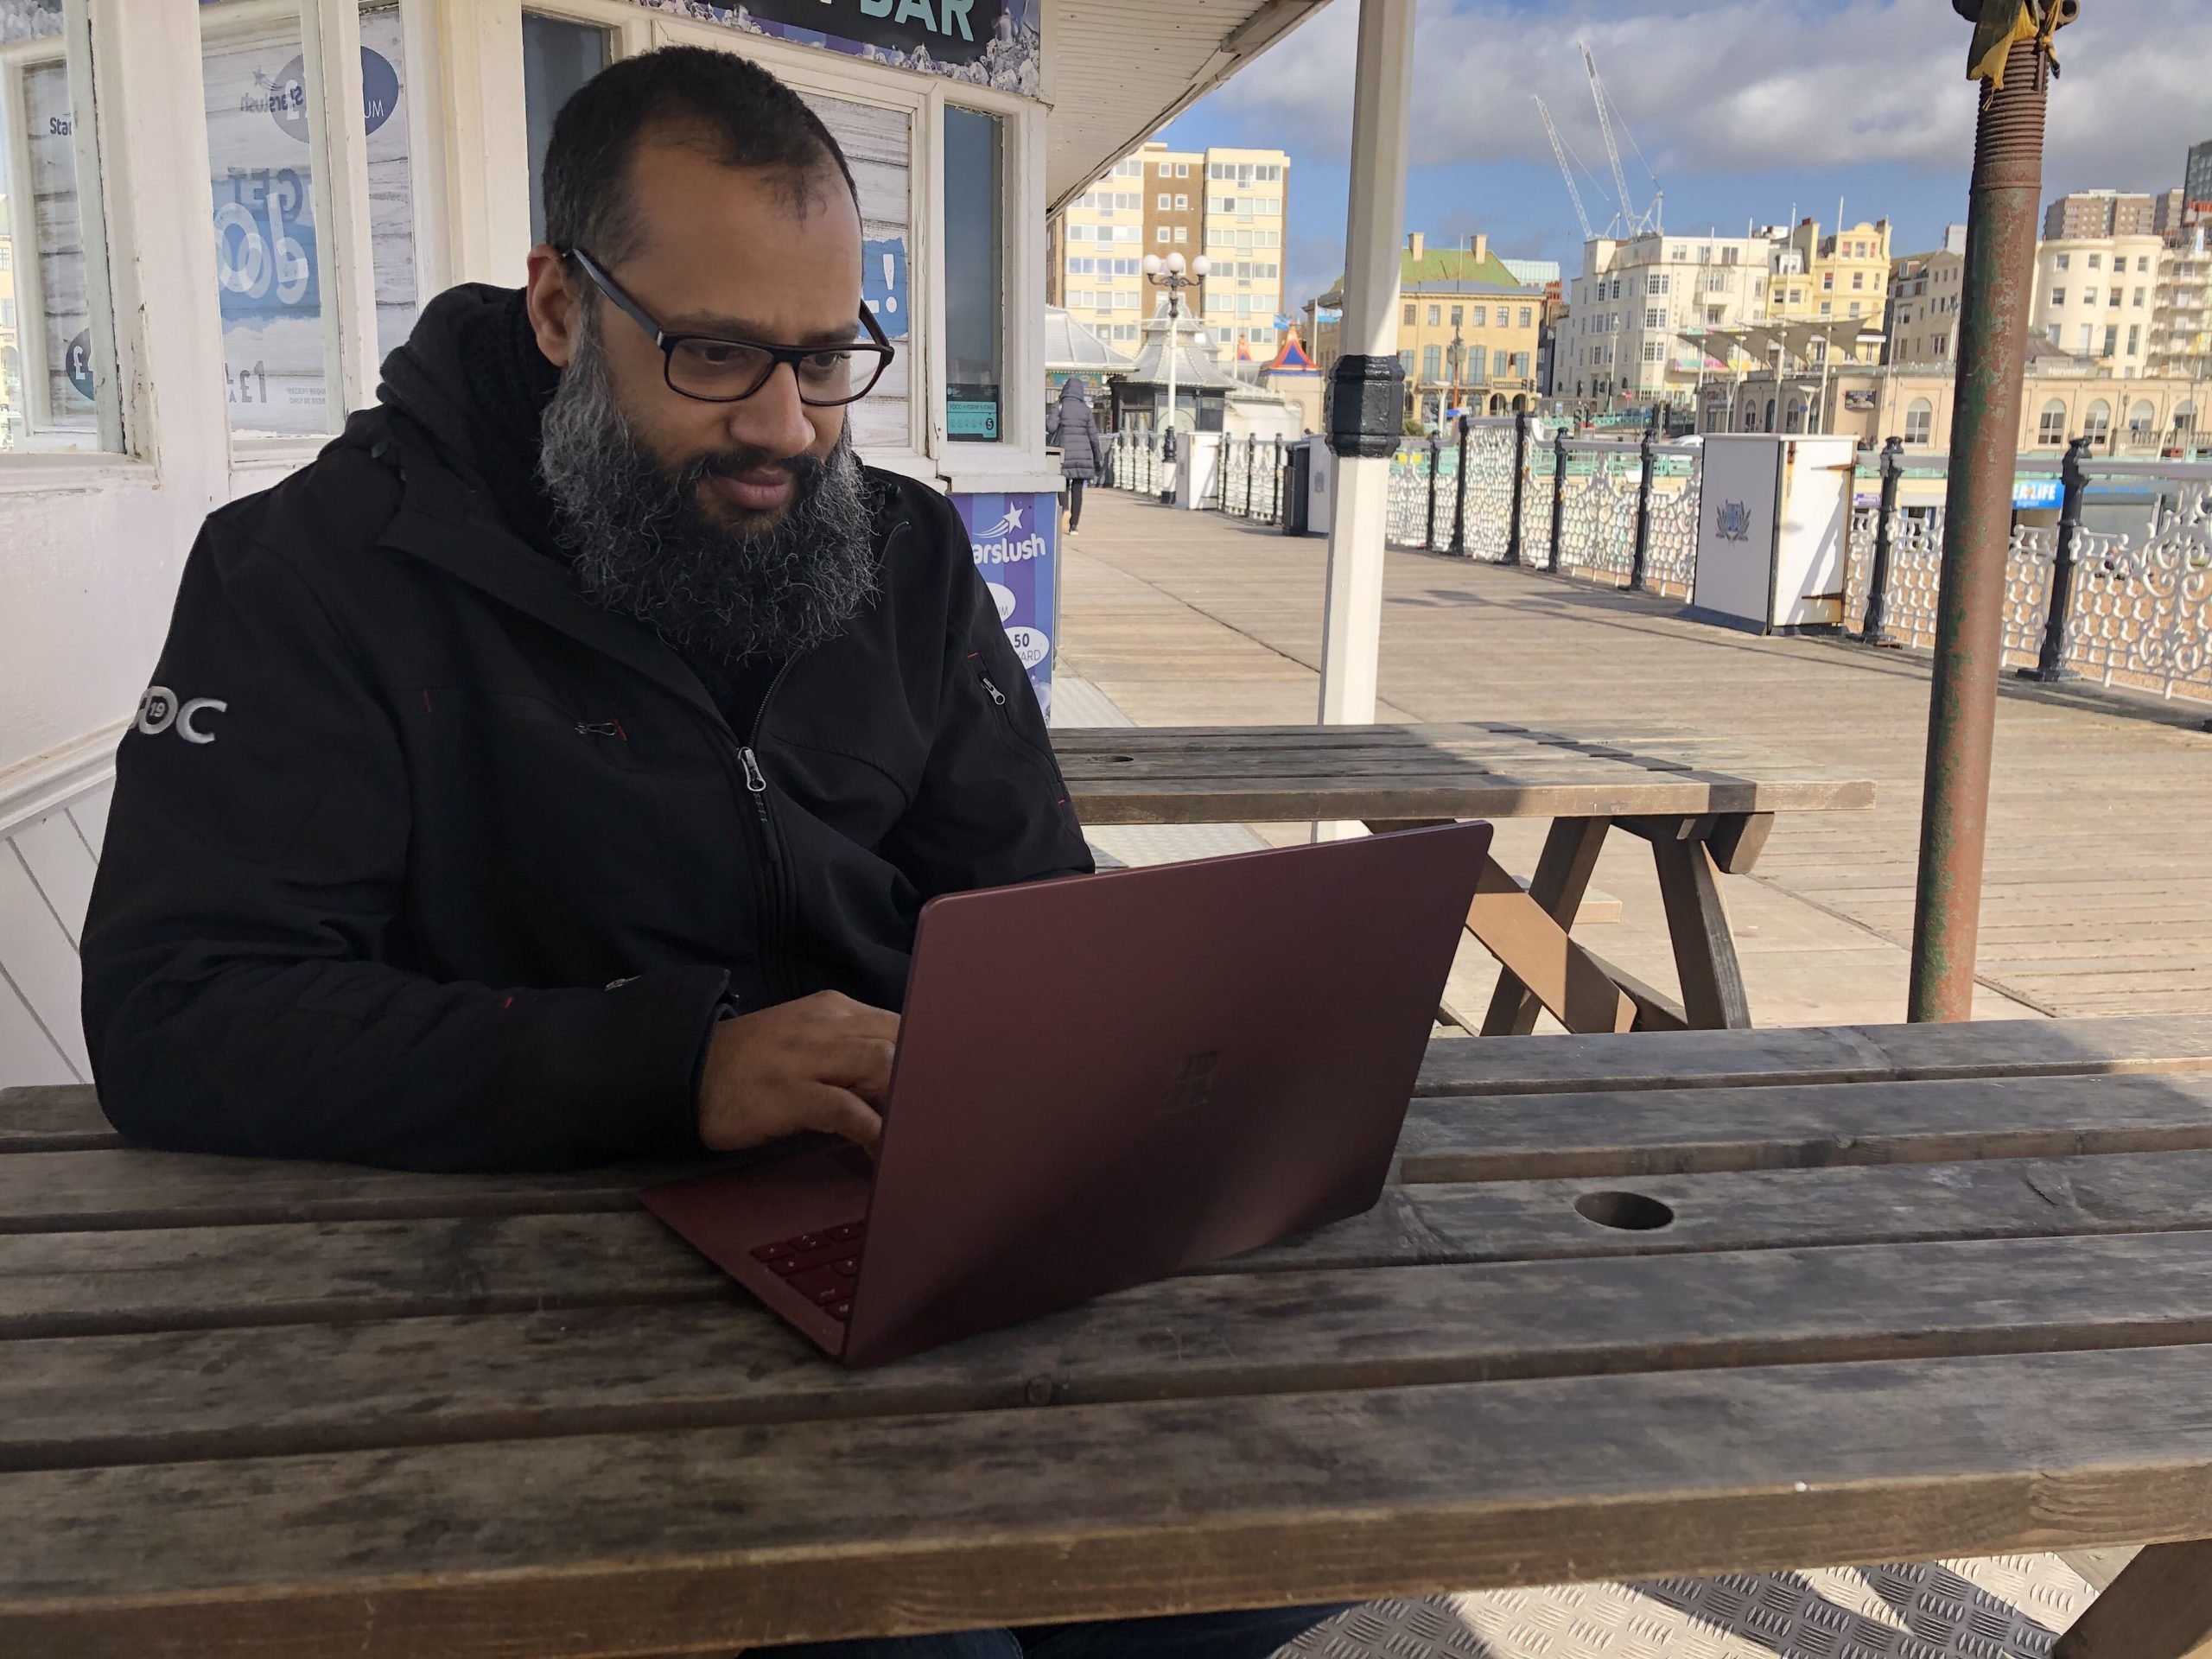 James Stone, a games developer in the ID@Xbox programme, uses a laptop on Brighton Palace Pier